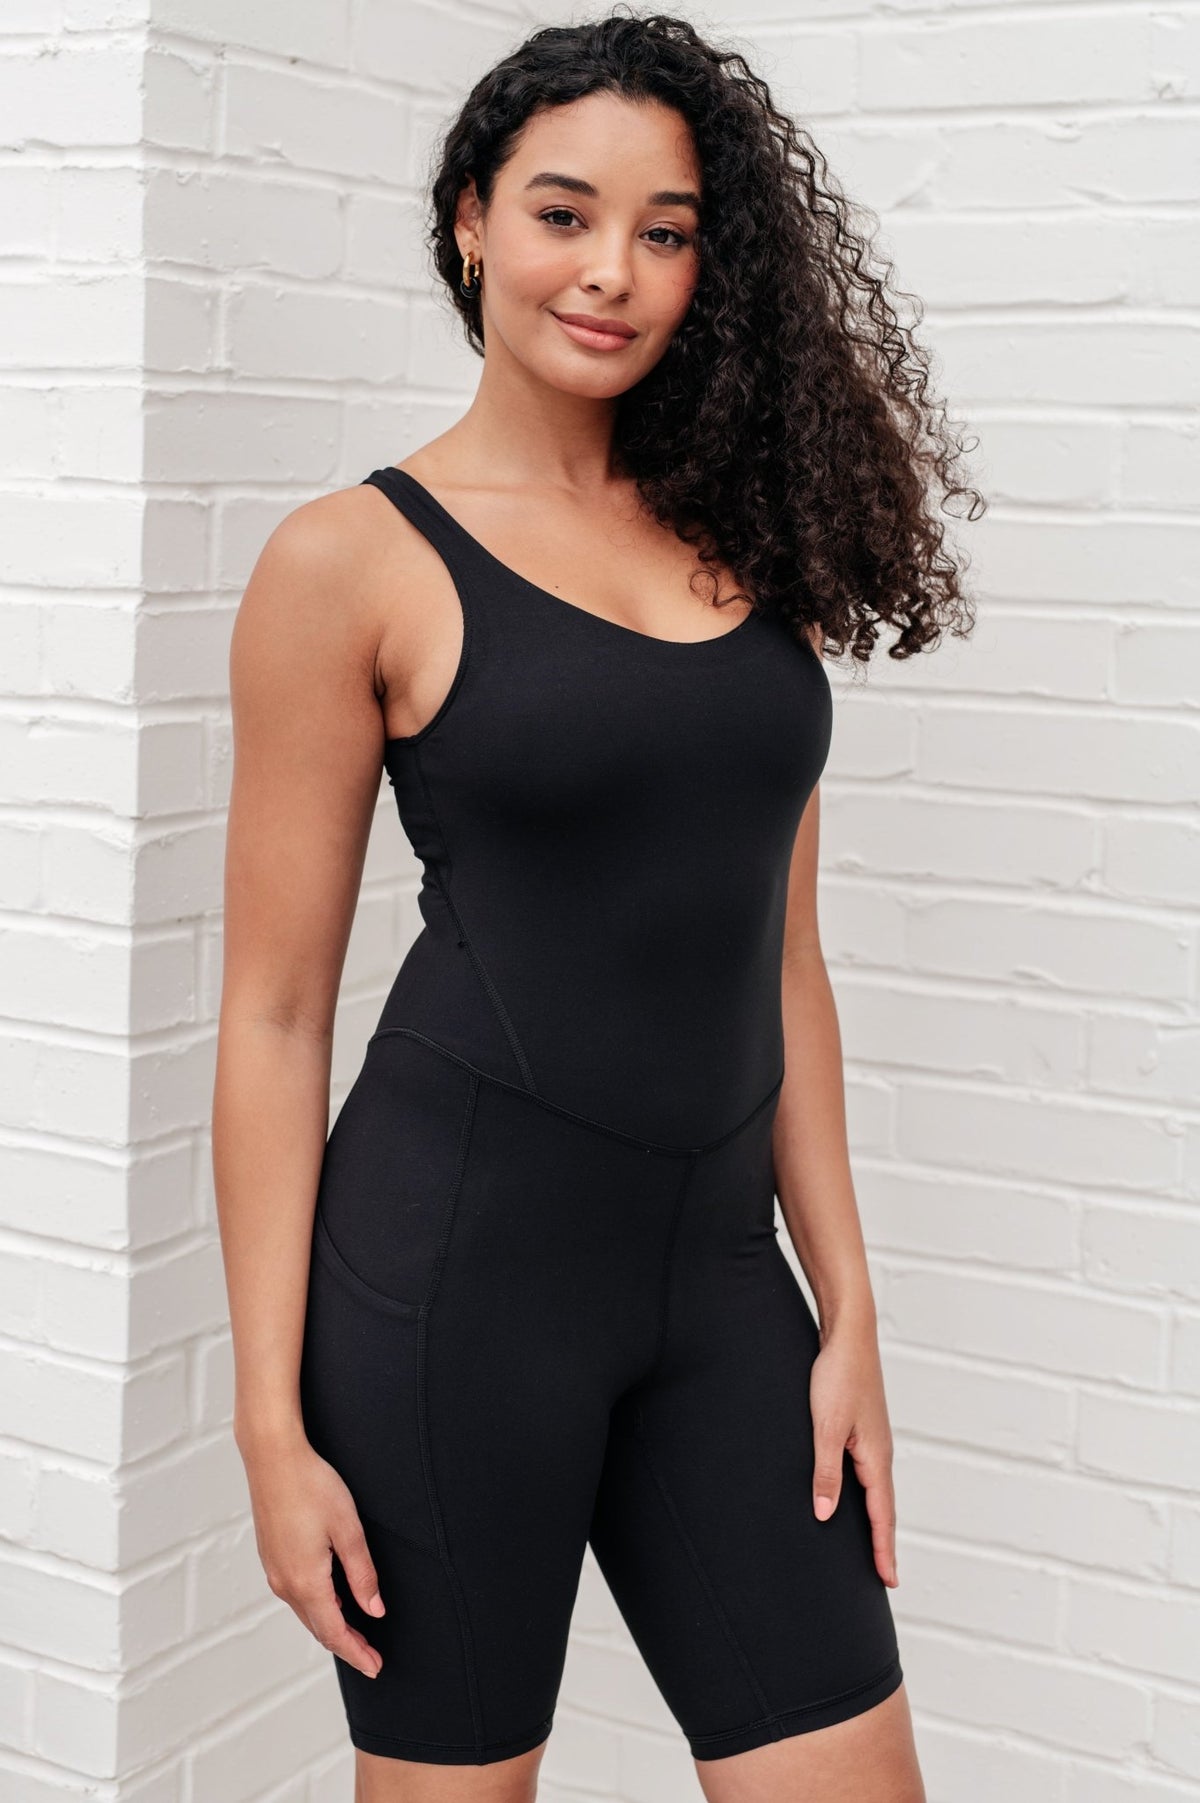 Sun Salutations Body Suit in Black - Happily Ever Atchison Shop Co.